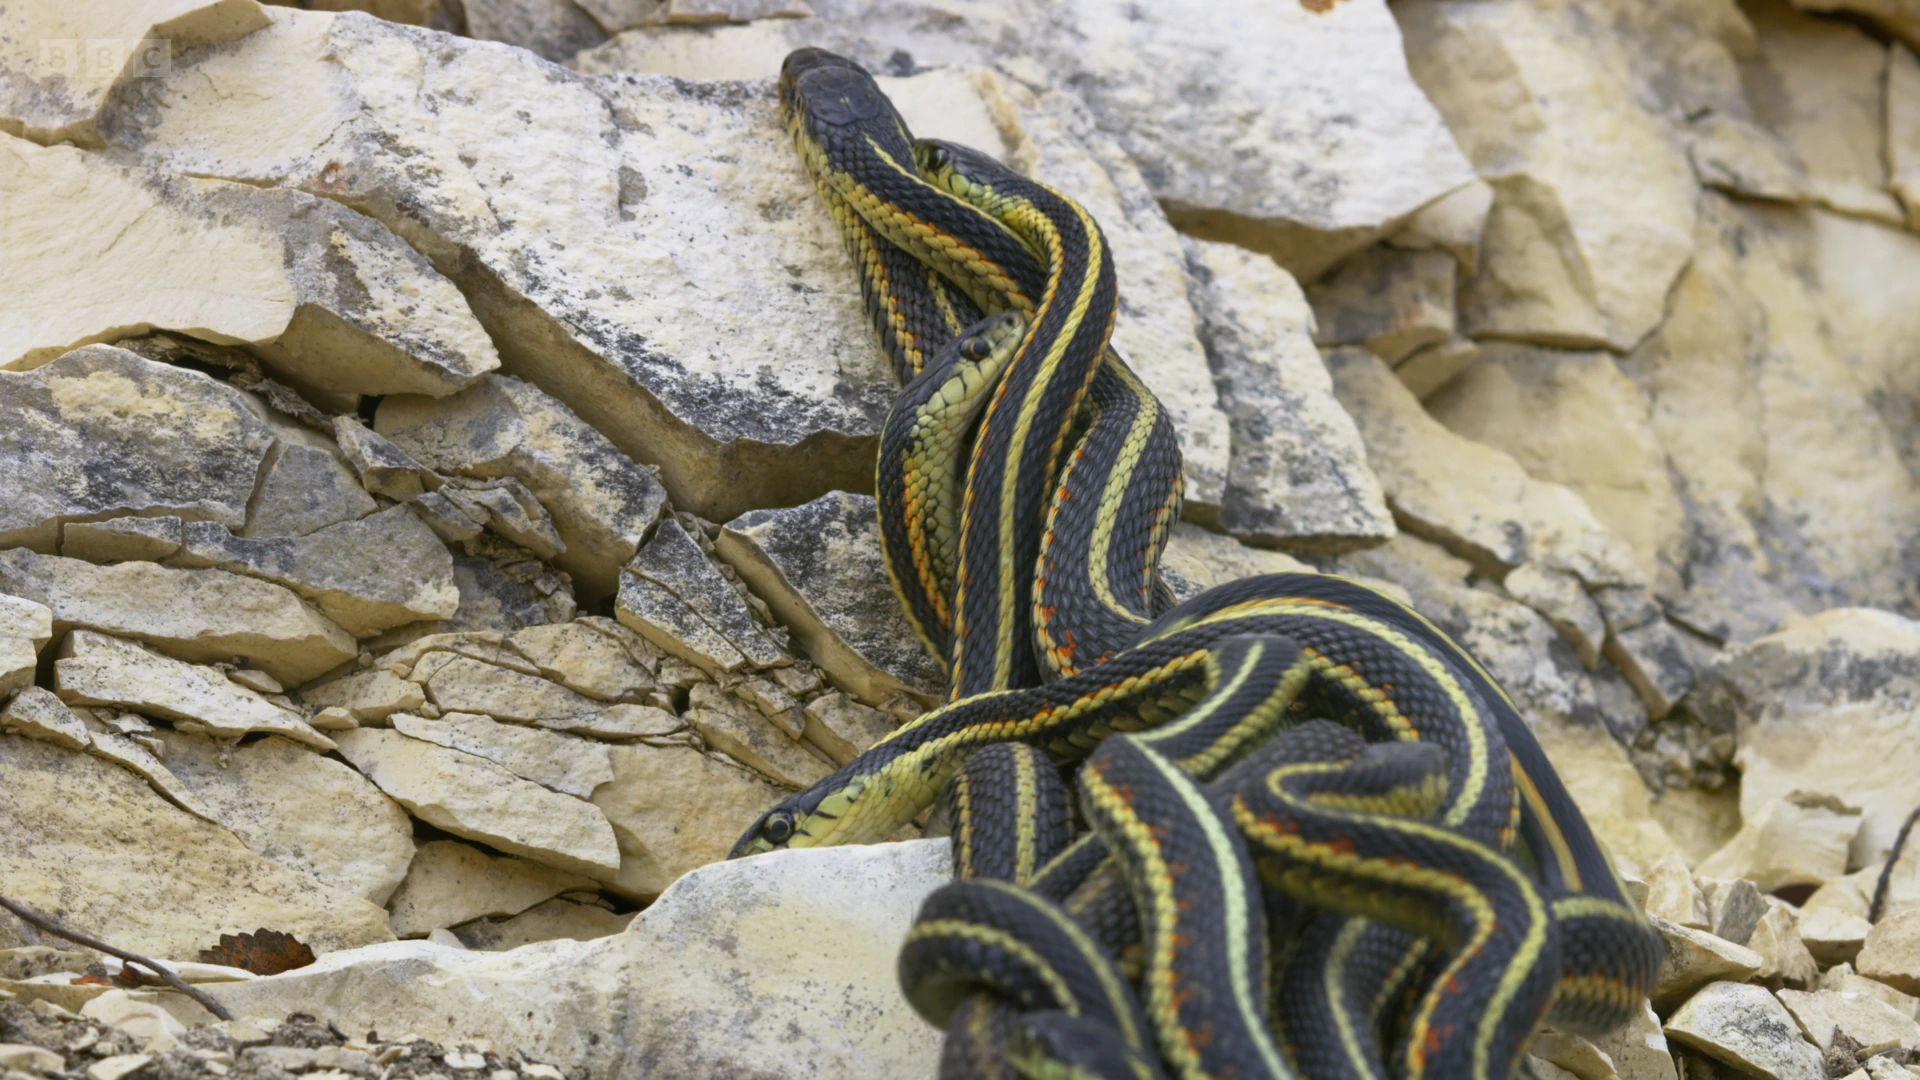 Red-sided garter snake (Thamnophis sirtalis parietalis) as shown in A Perfect Planet - The Sun